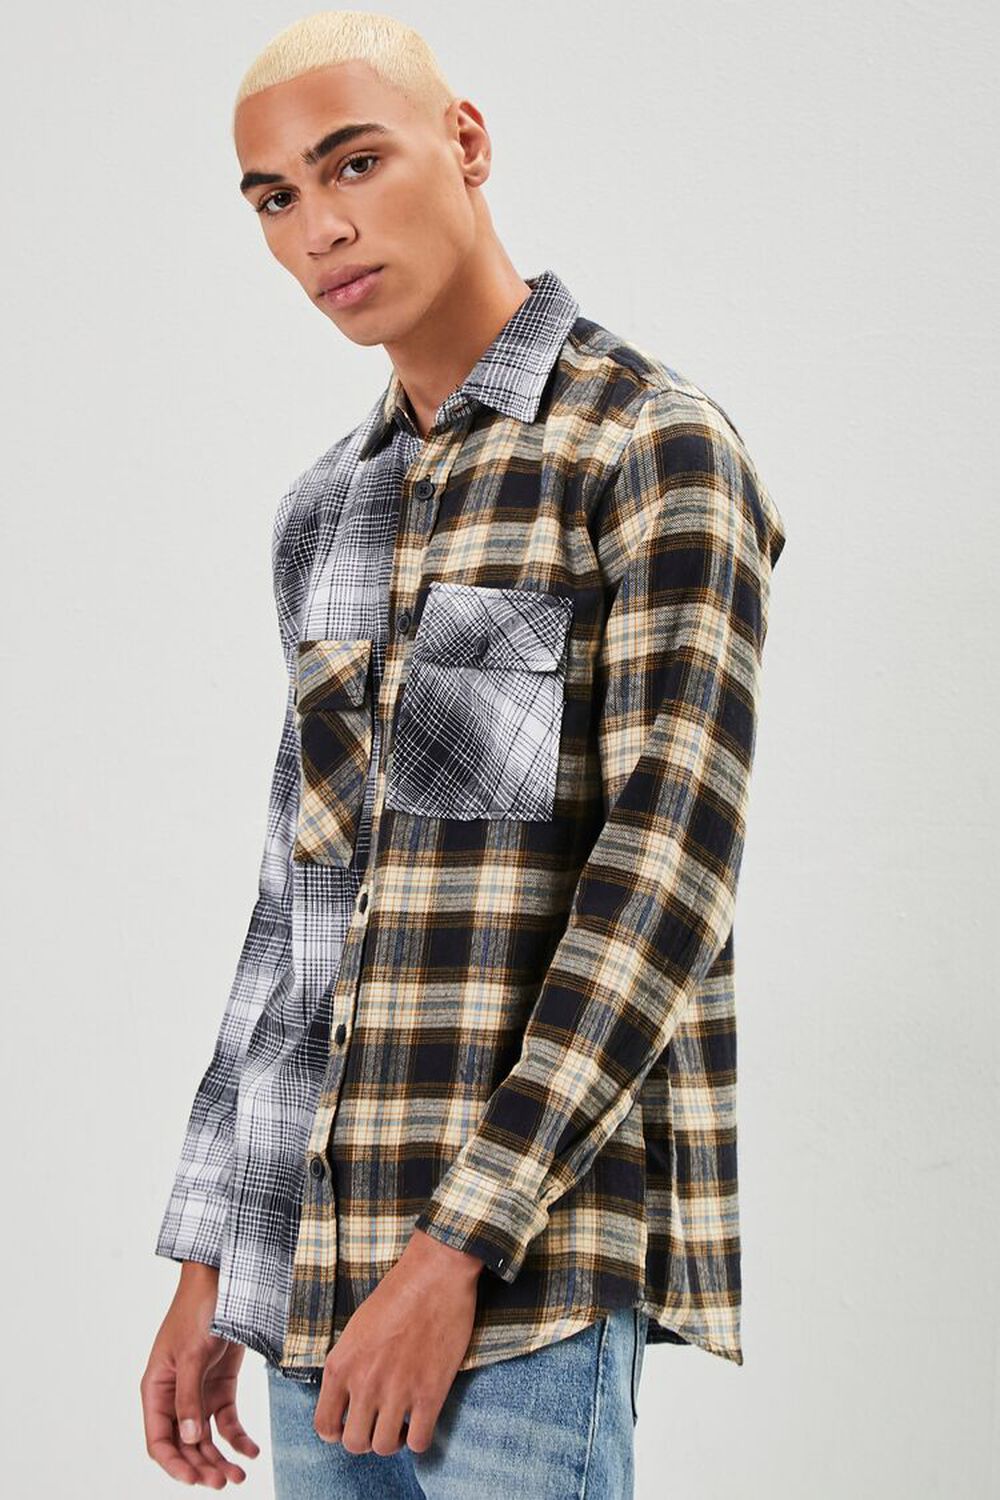 GREY/MULTI Reworked Plaid Button-Front Shirt, image 1